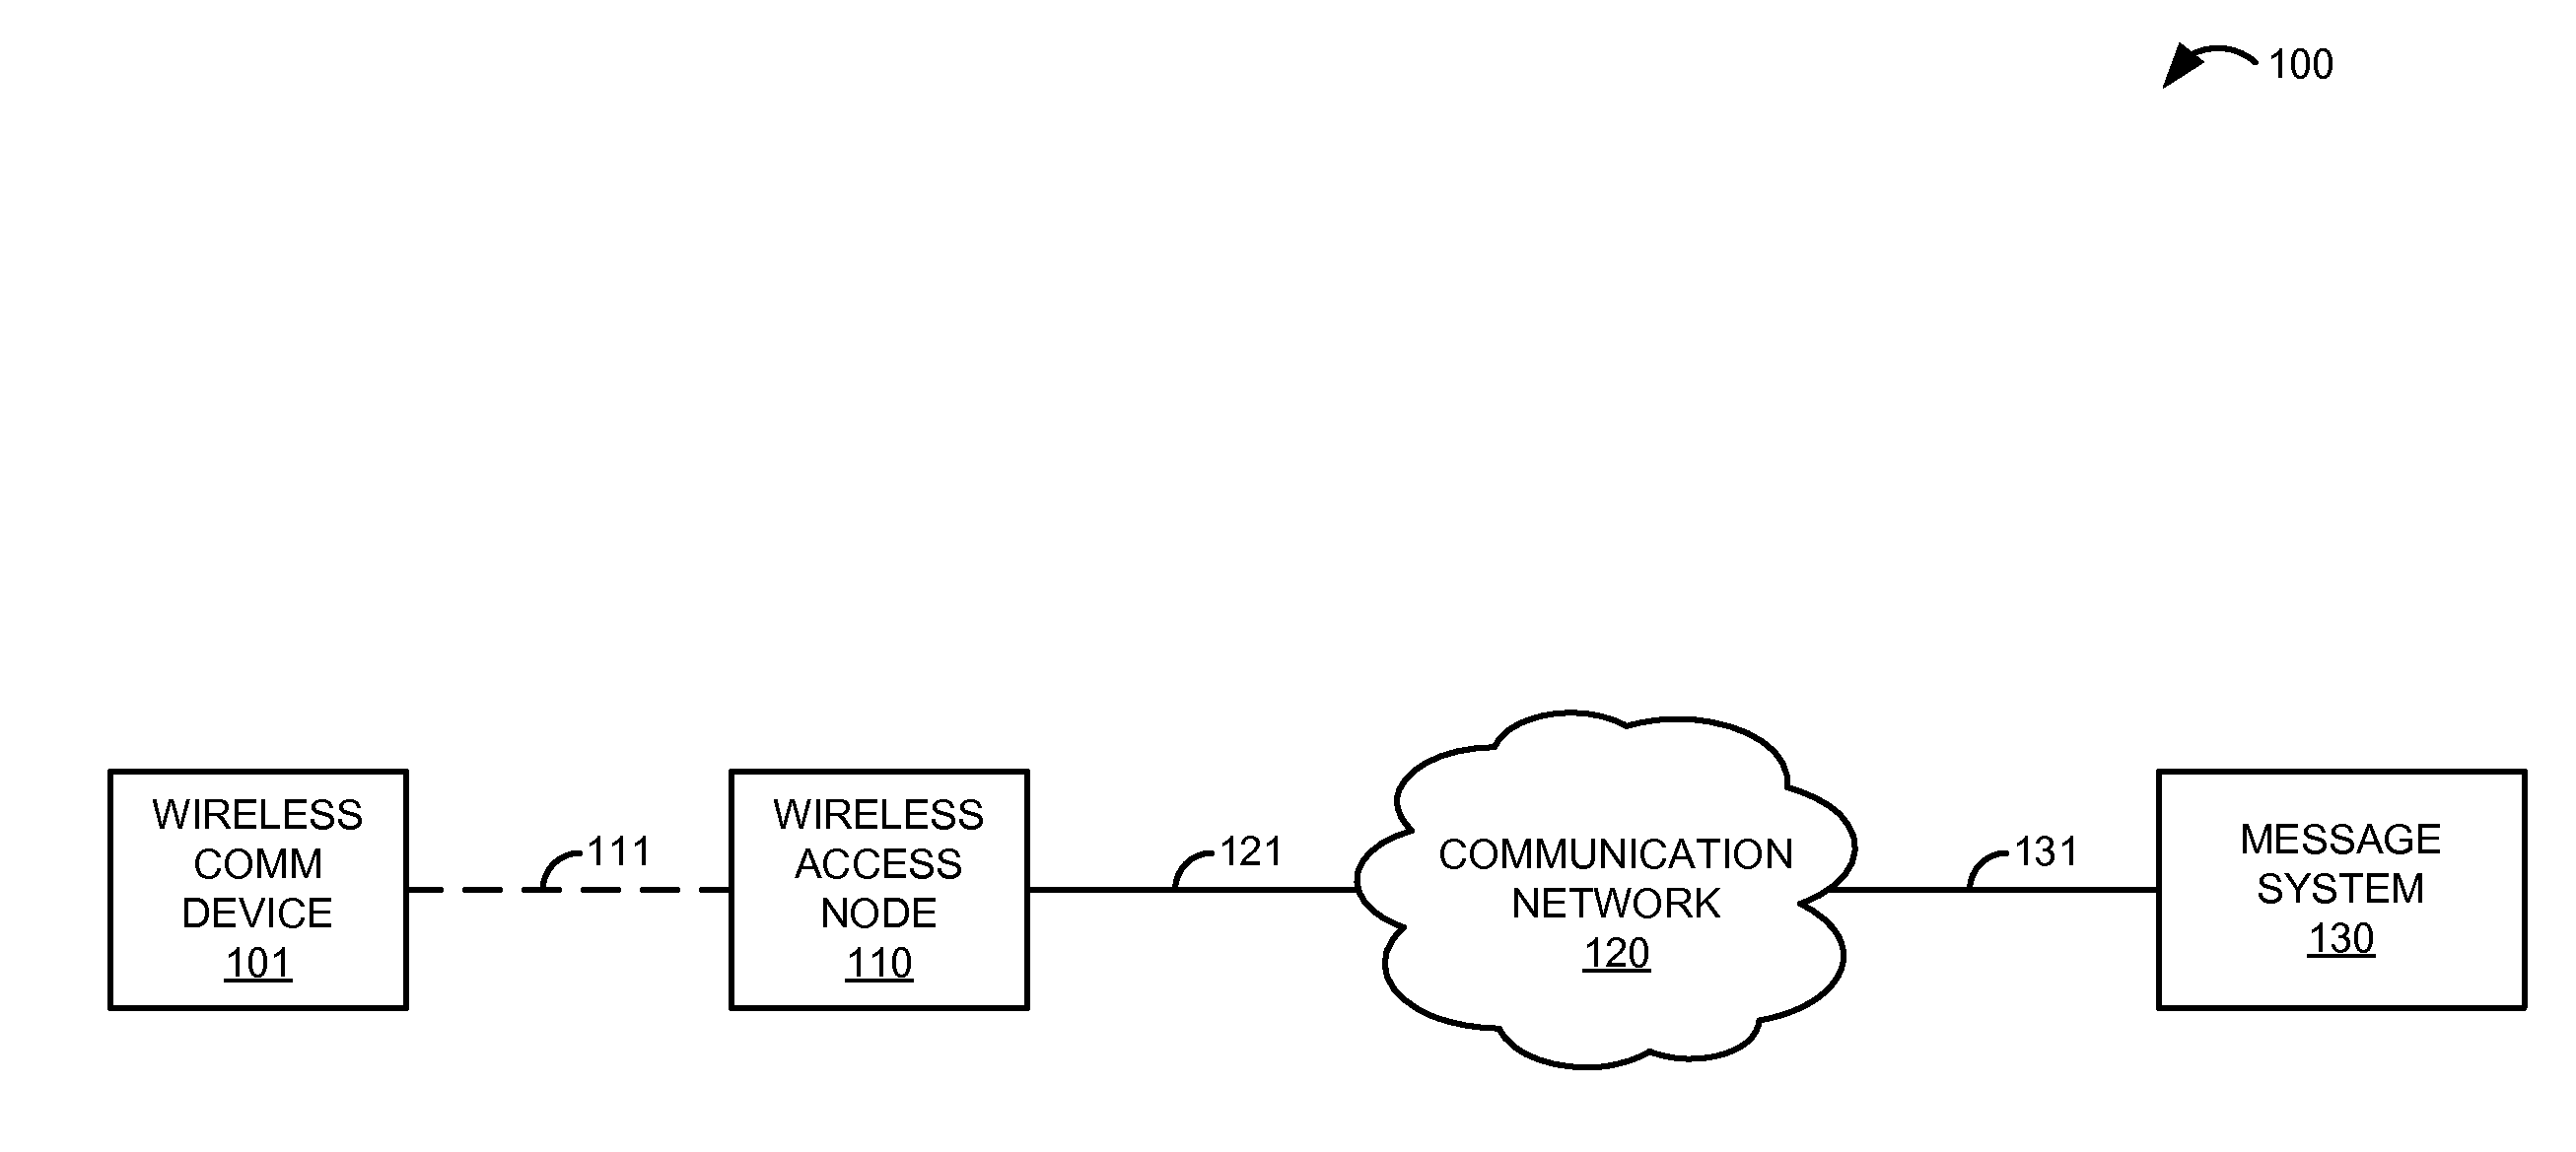 Covert message redaction and recovery in a wireless communication device